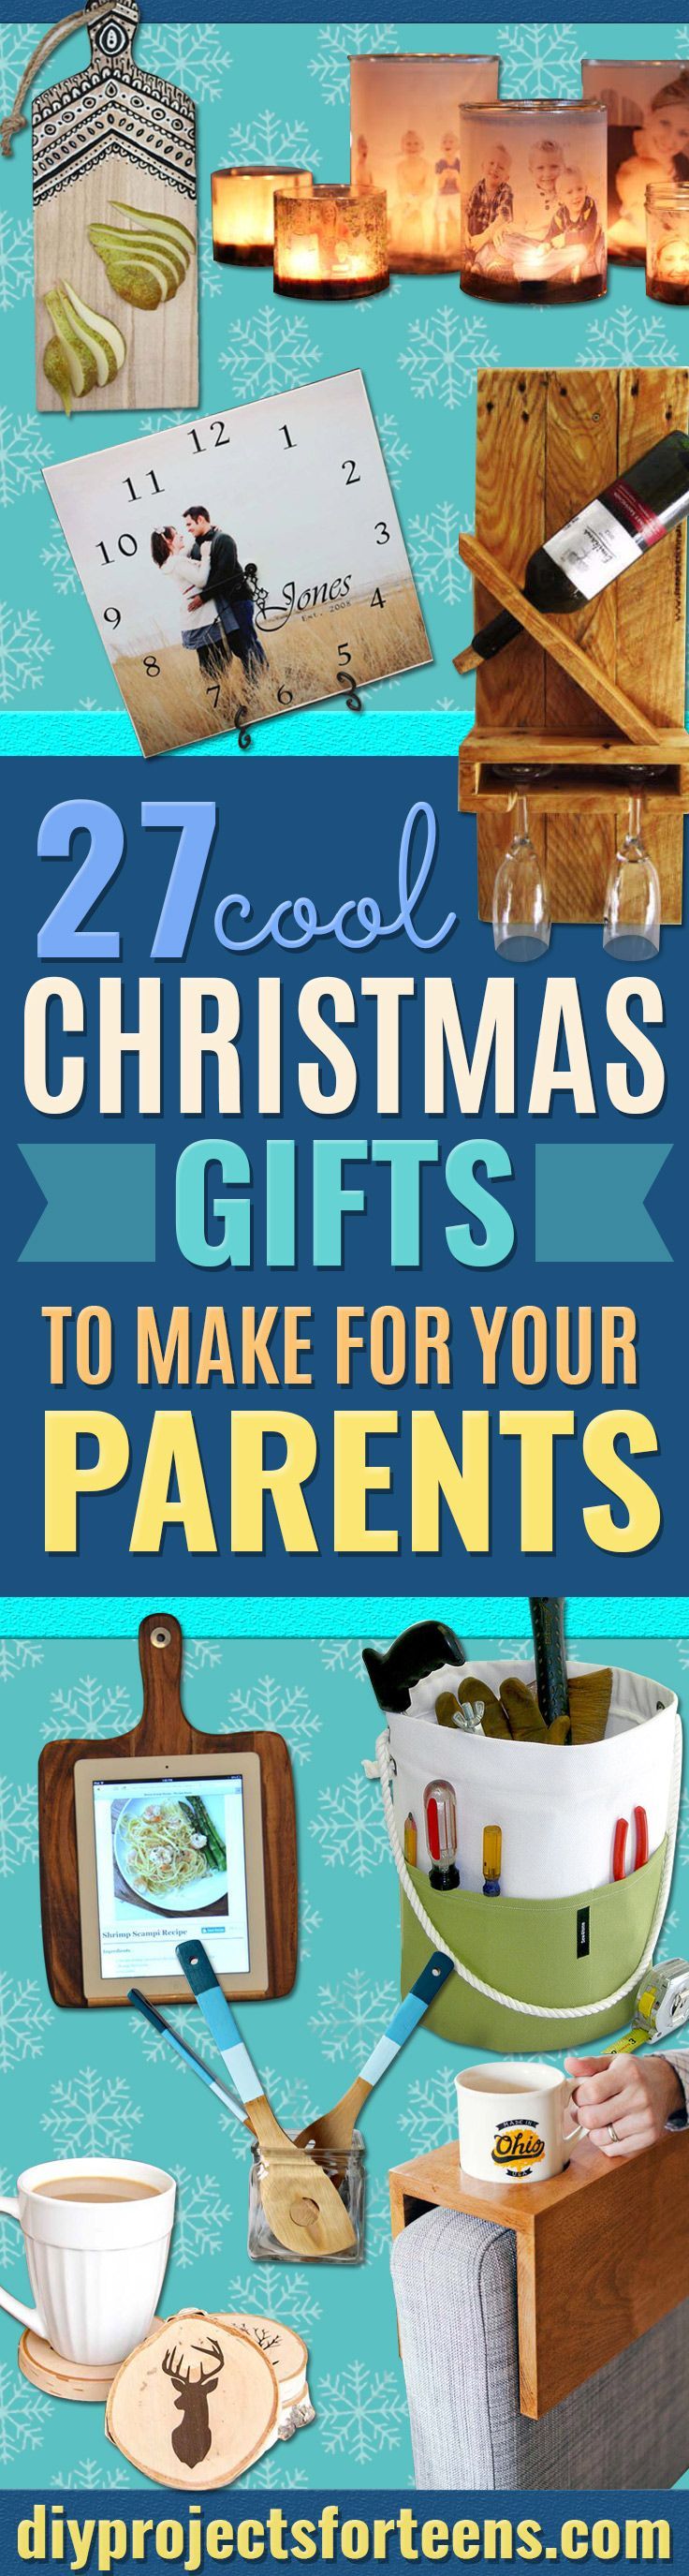 DIY Christmas Presents To Make For Parents – Cute, Easy and Cheap Crafts and Gift Ideas for Mom and Dad – Awesome Things to Make